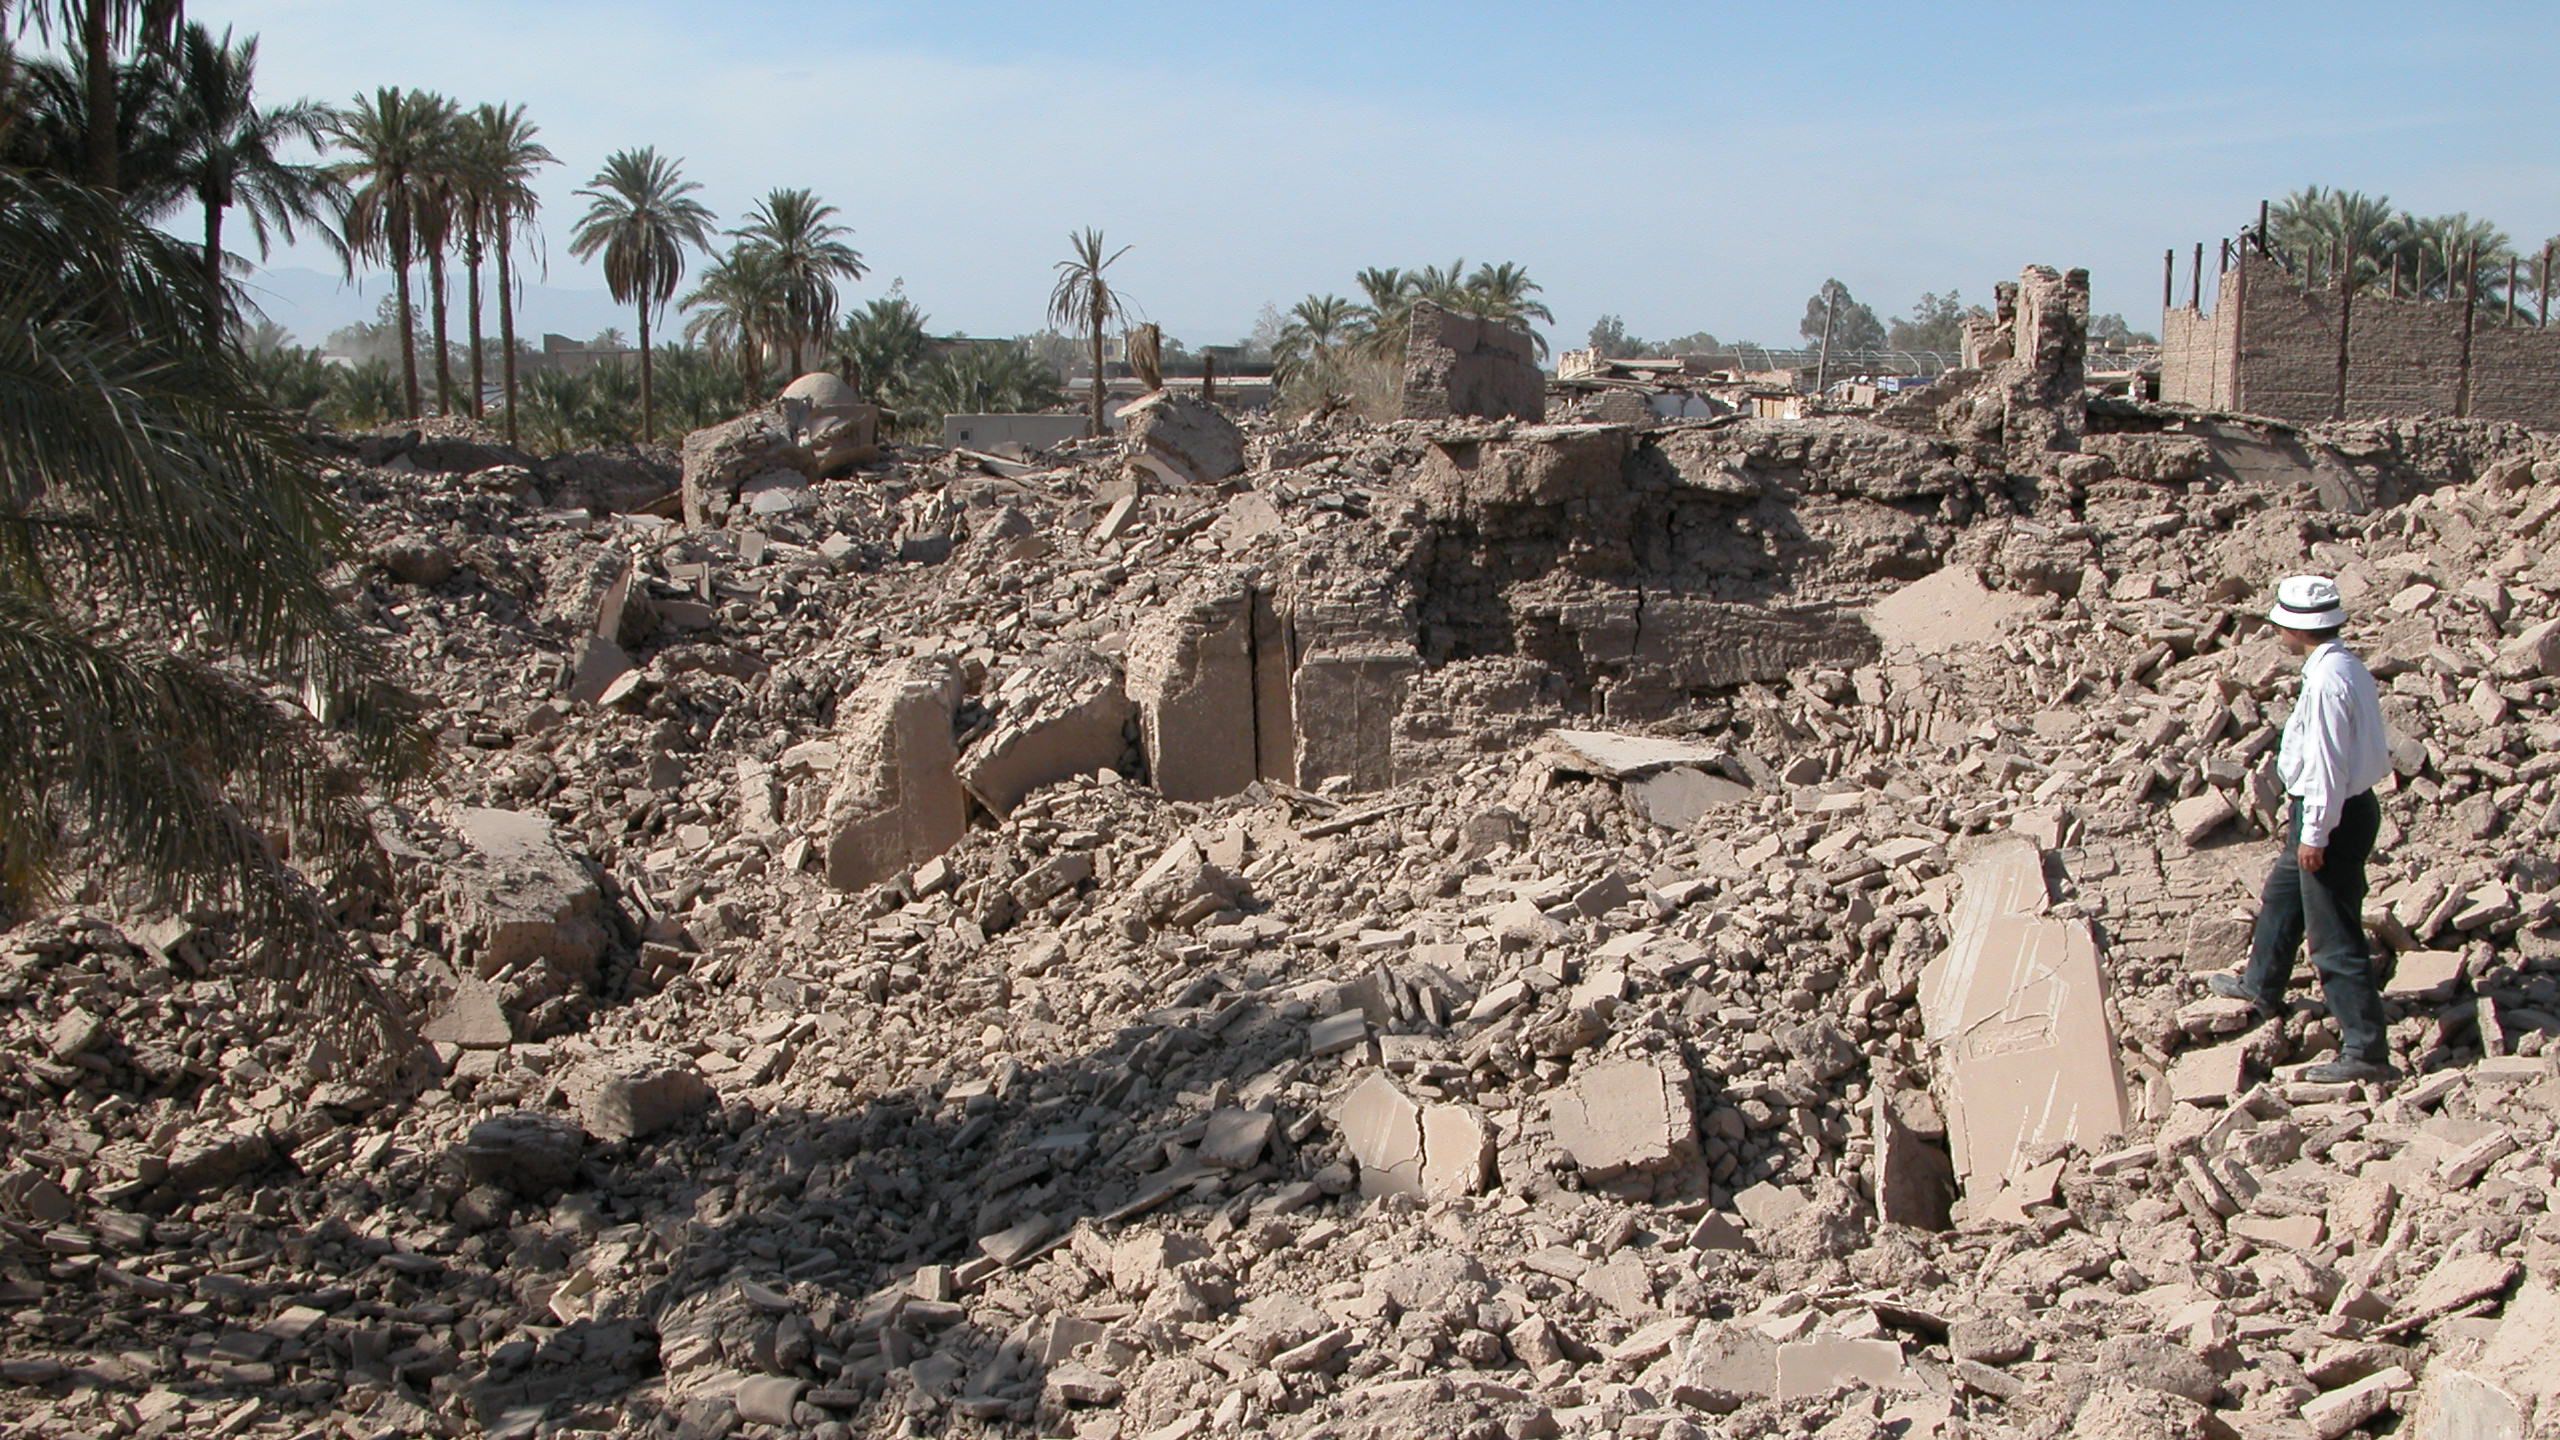 Damage in Bam, Iran after a 2003 earthquake of magnitude 6.6 that killed 30,000 people.